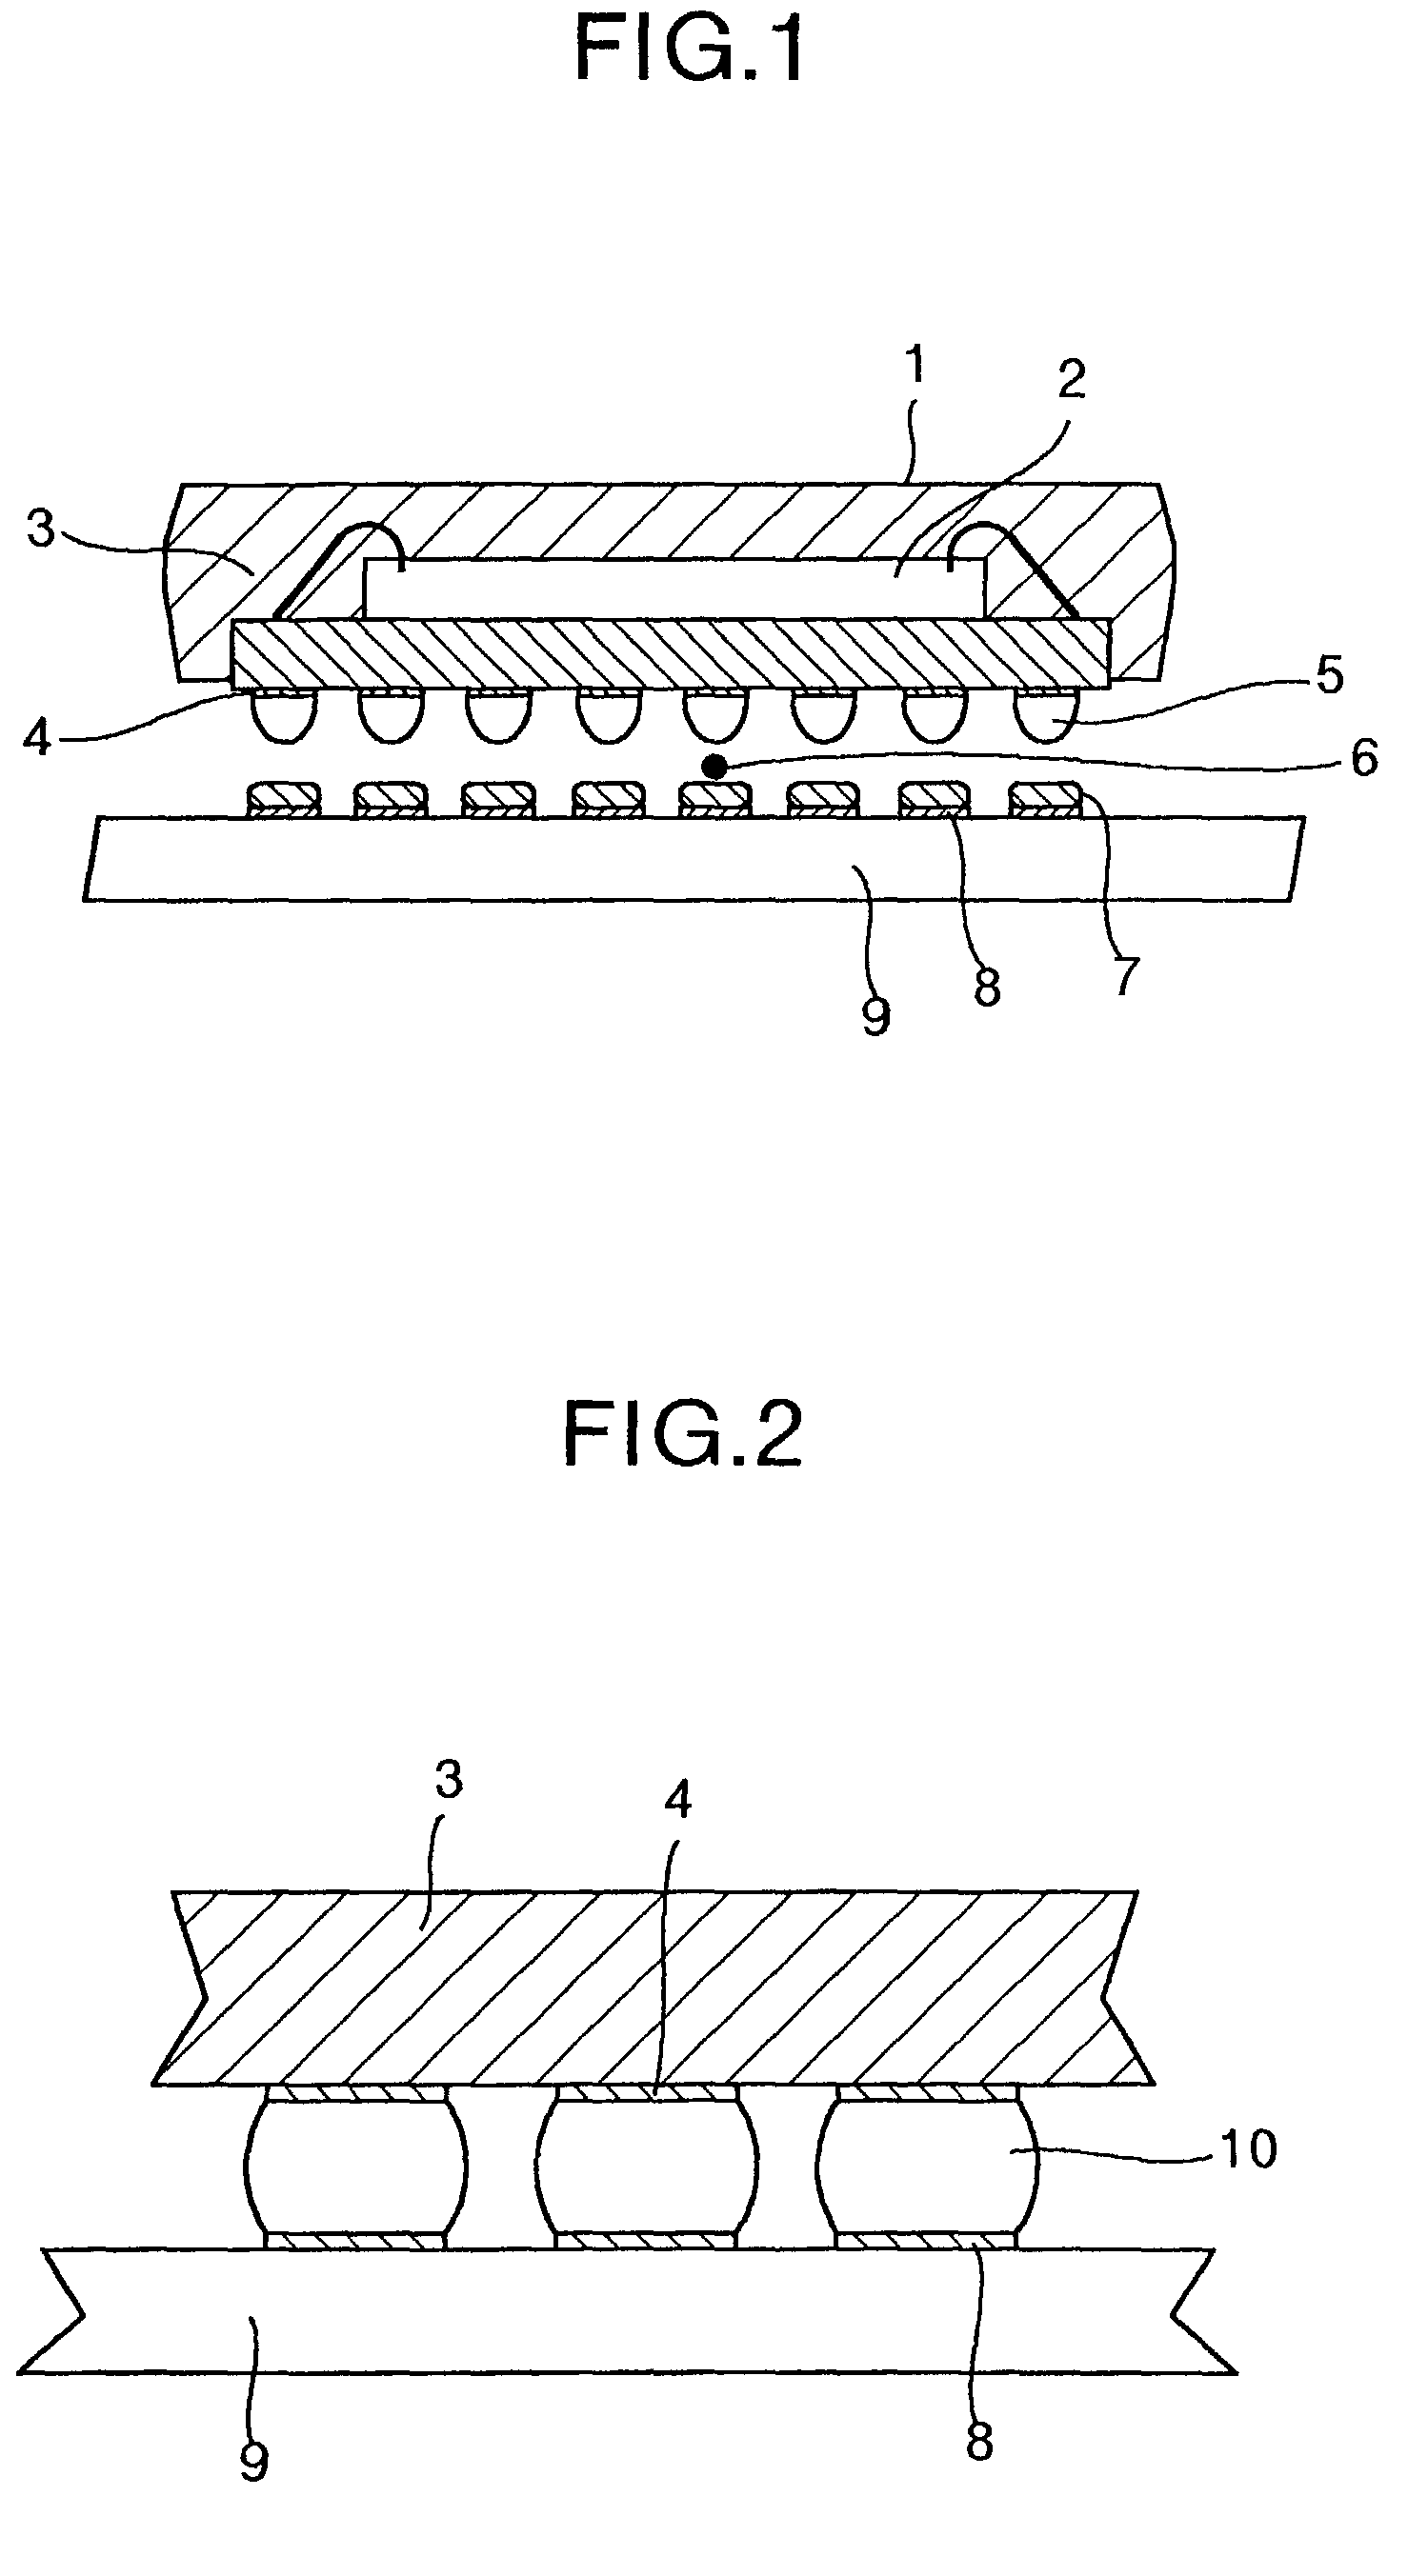 Semiconductor device having solder bumps reliably reflow solderable